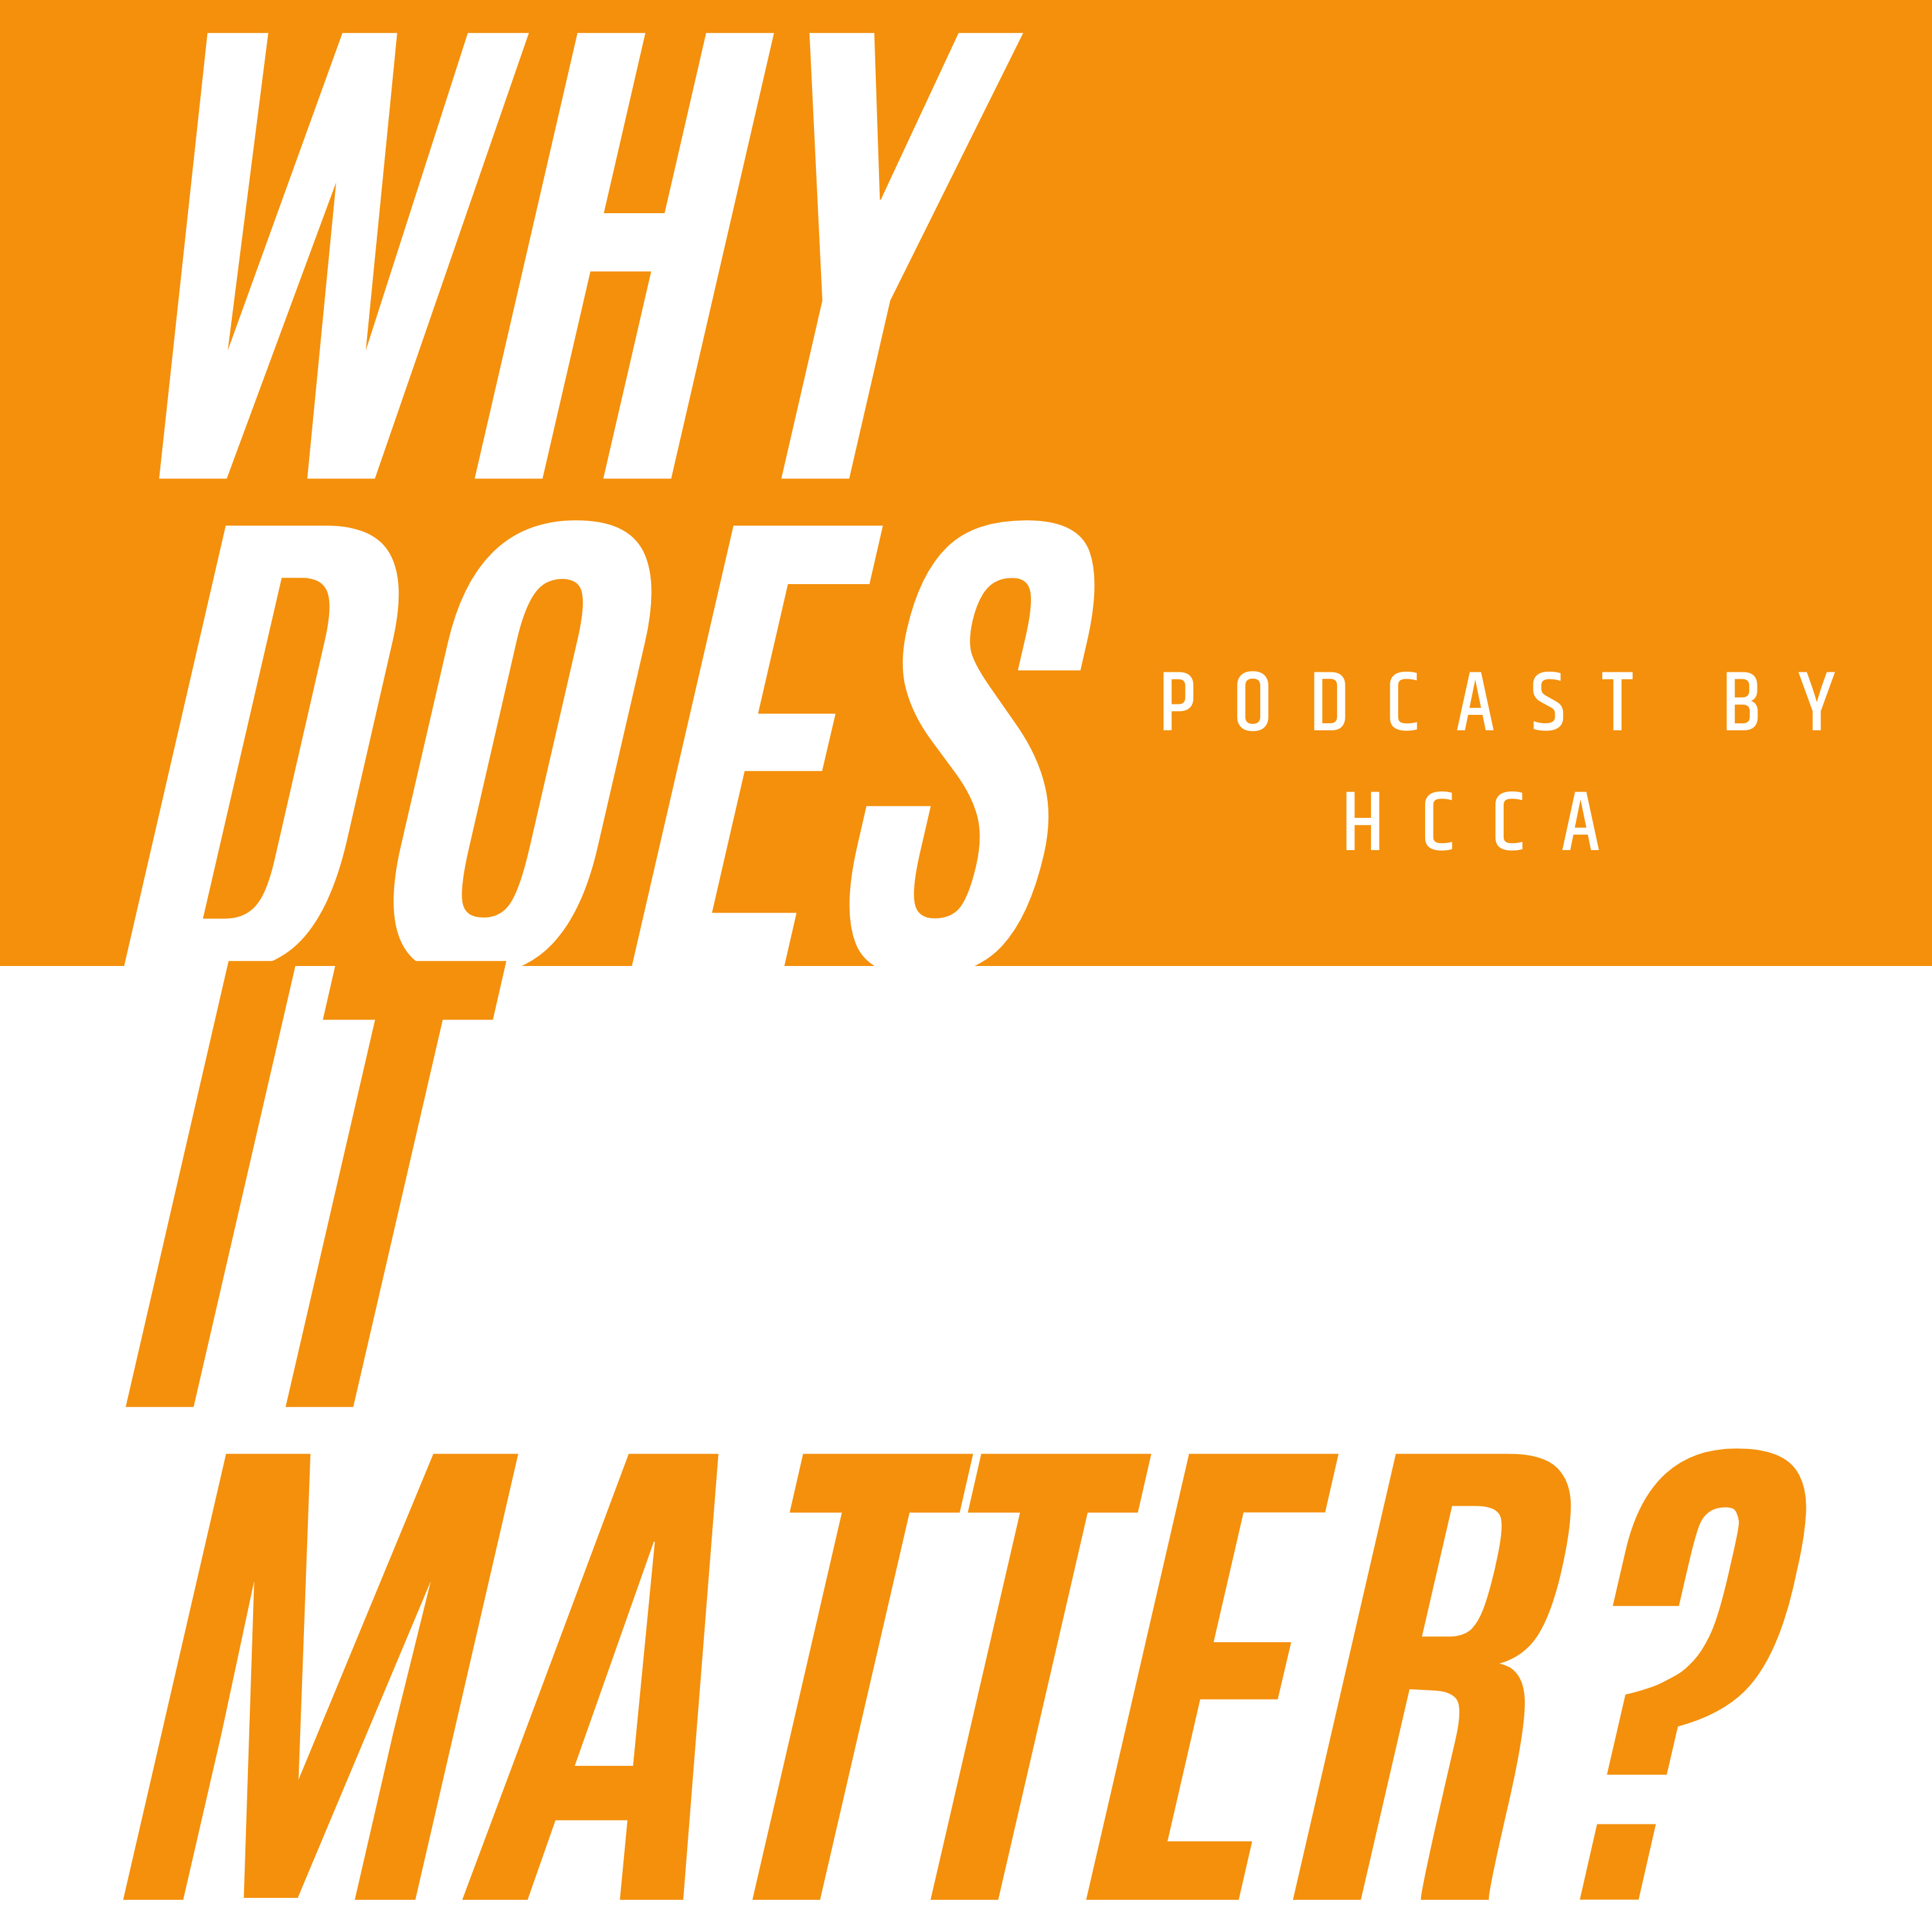 Why Does It Matter?